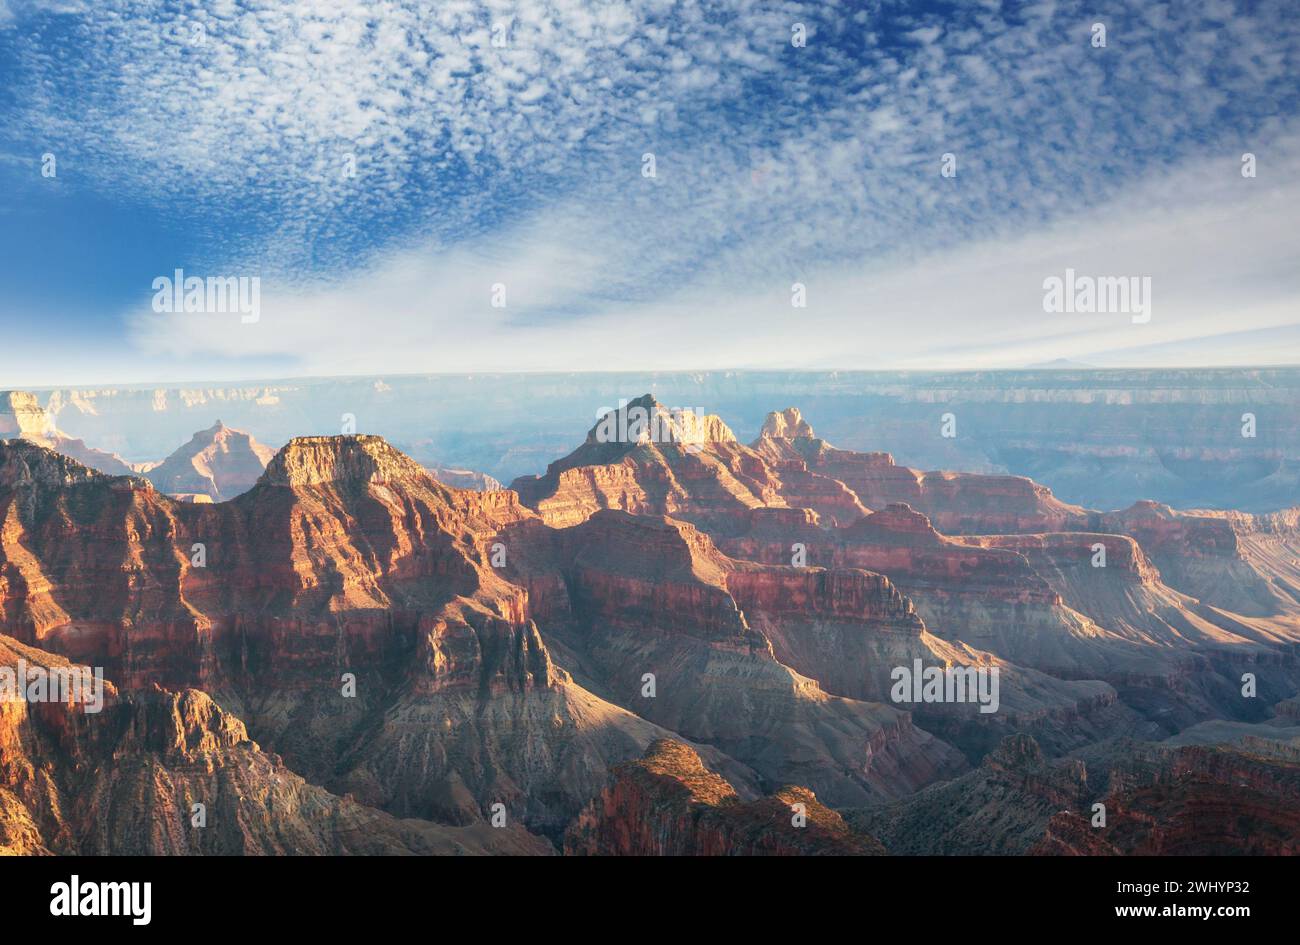 The Grand Canyon [grÃ¦nd ËˆkÃ¦njÉ™n] is a steep, approximately 450-kilometer-long gorge in the north of the US state of Arizona, Stock Photo